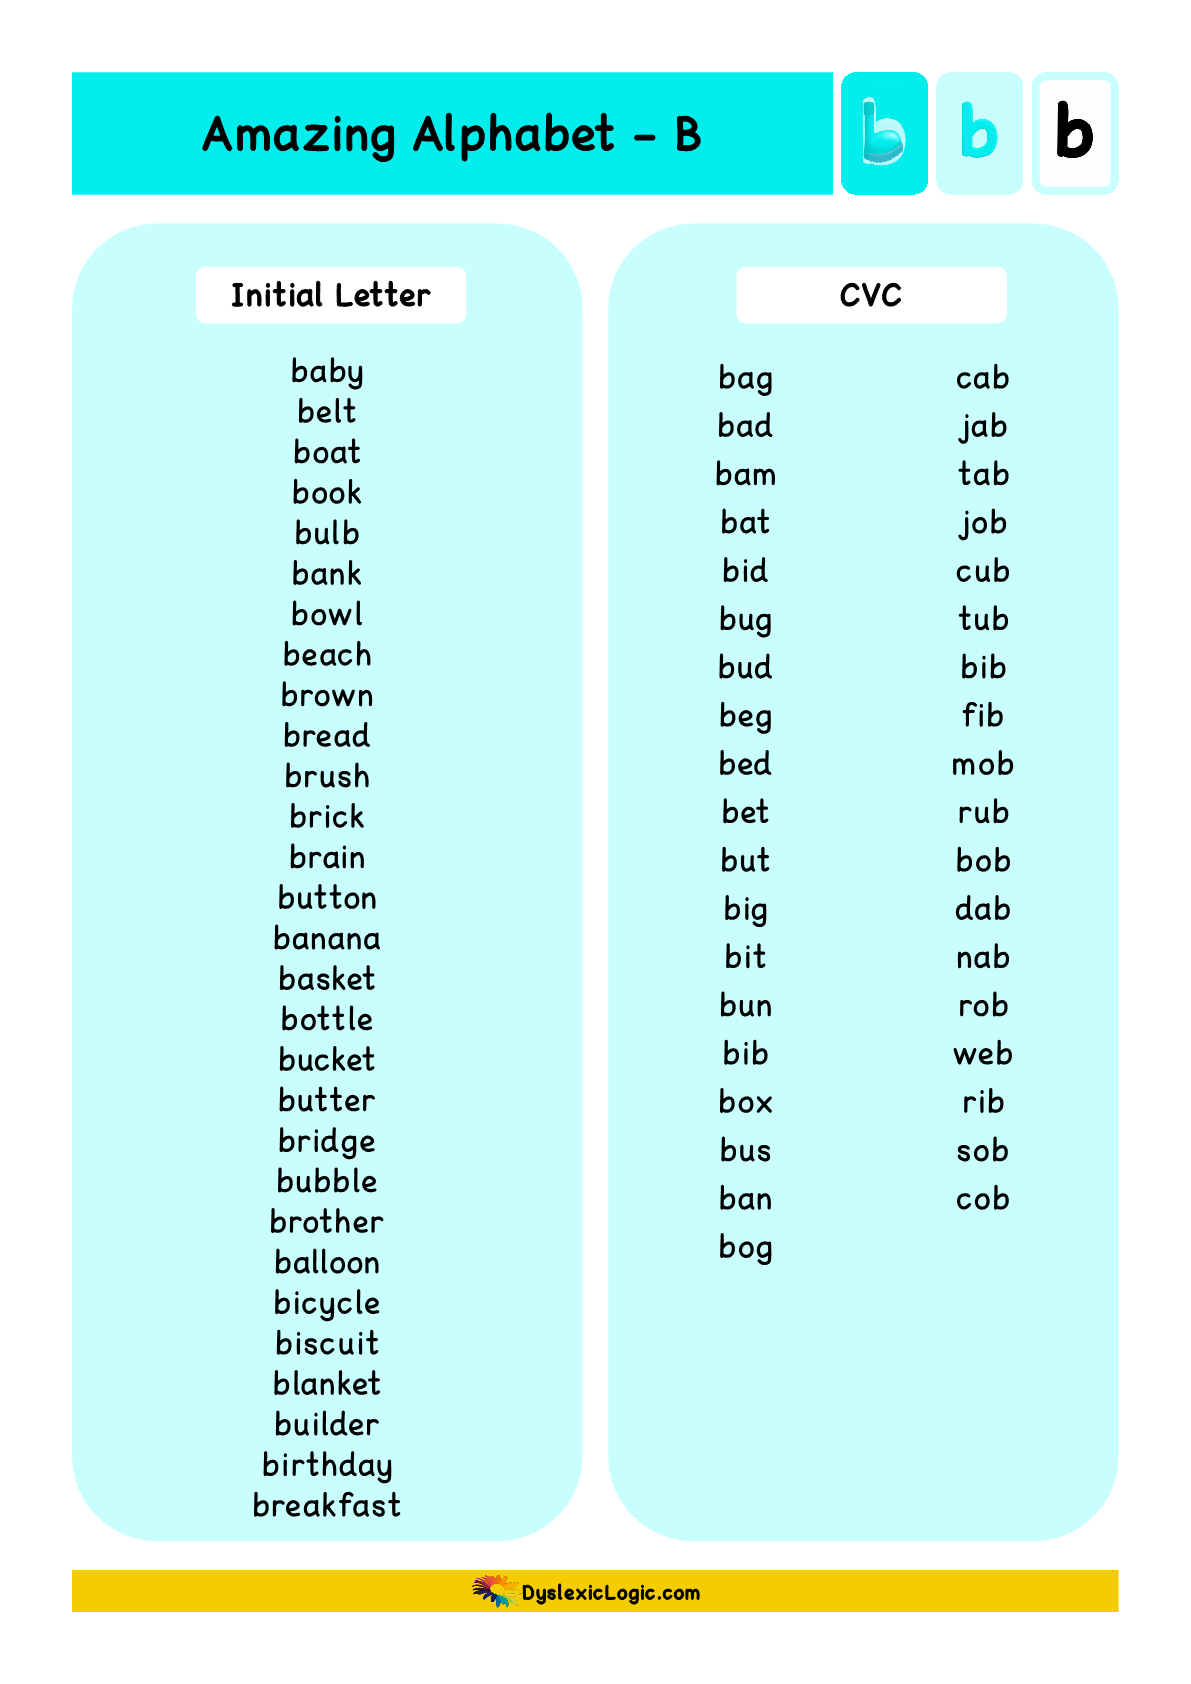 List of unusual words beginning with B